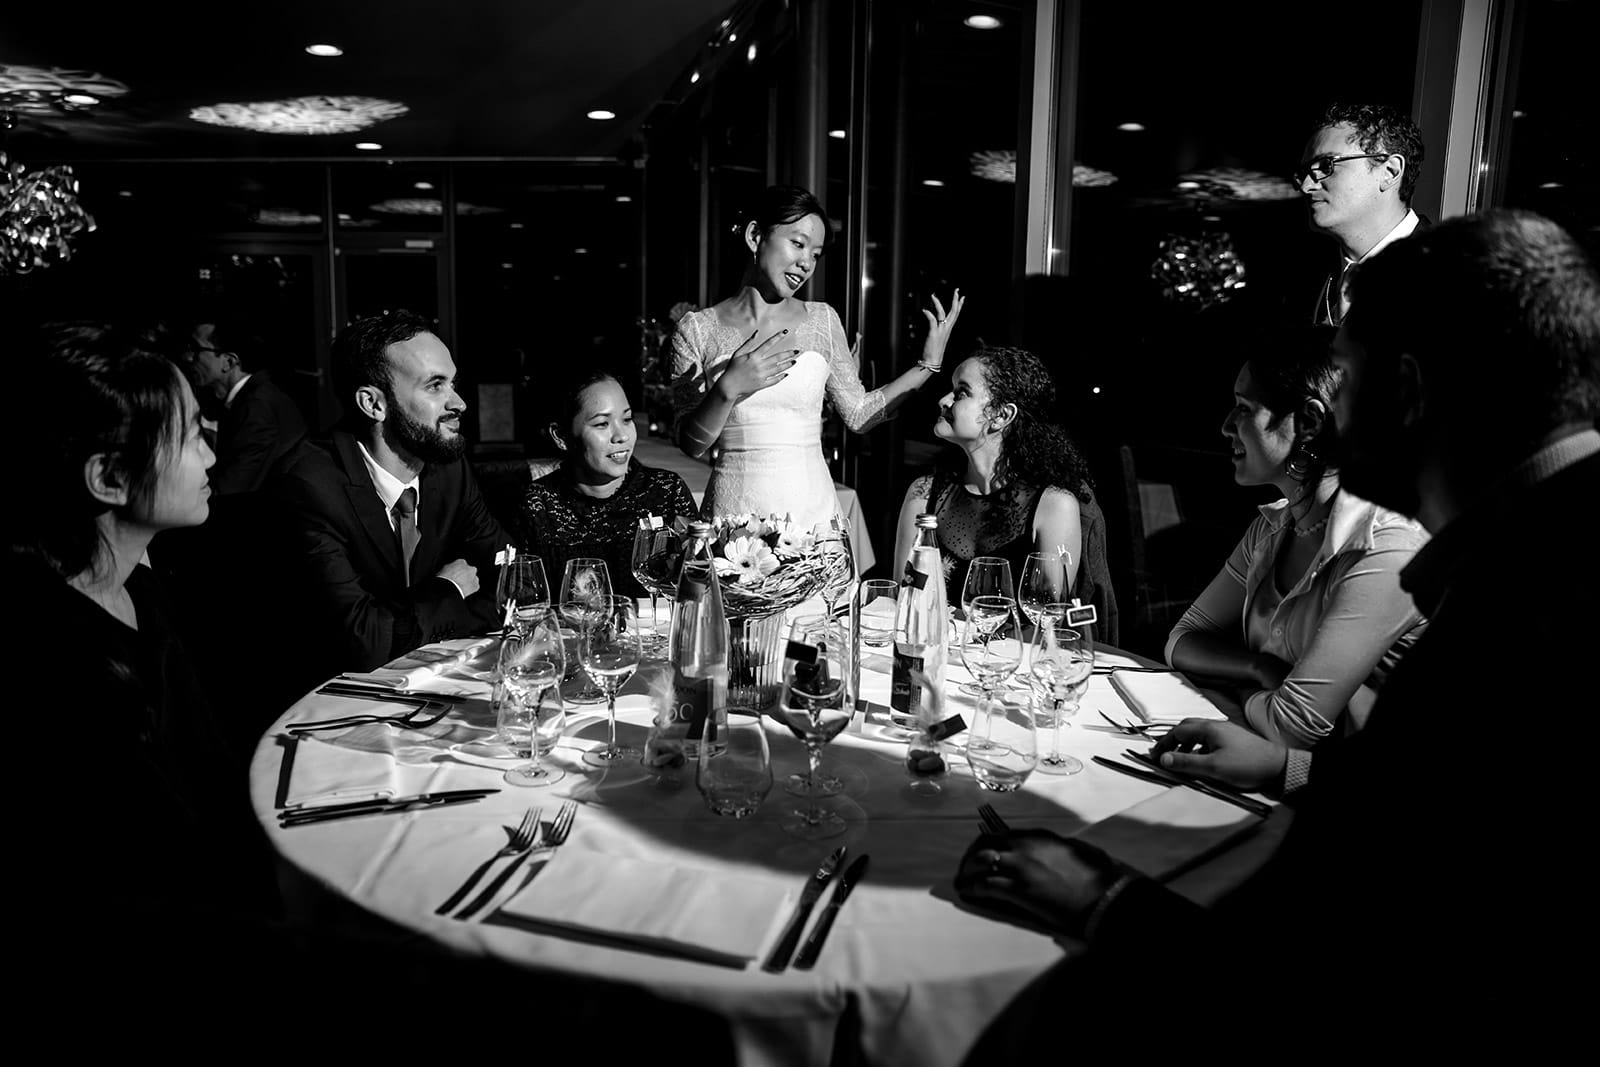  How to choose your wedding photographer 2018 2019 Best Wedding Photographercomment choisir son photographe de mariage 2018 2019 meilleur photographe de mariage meilleur photographe de mariage Lyon Photographe mariage Lyon Photographe reportage mariage Lyon